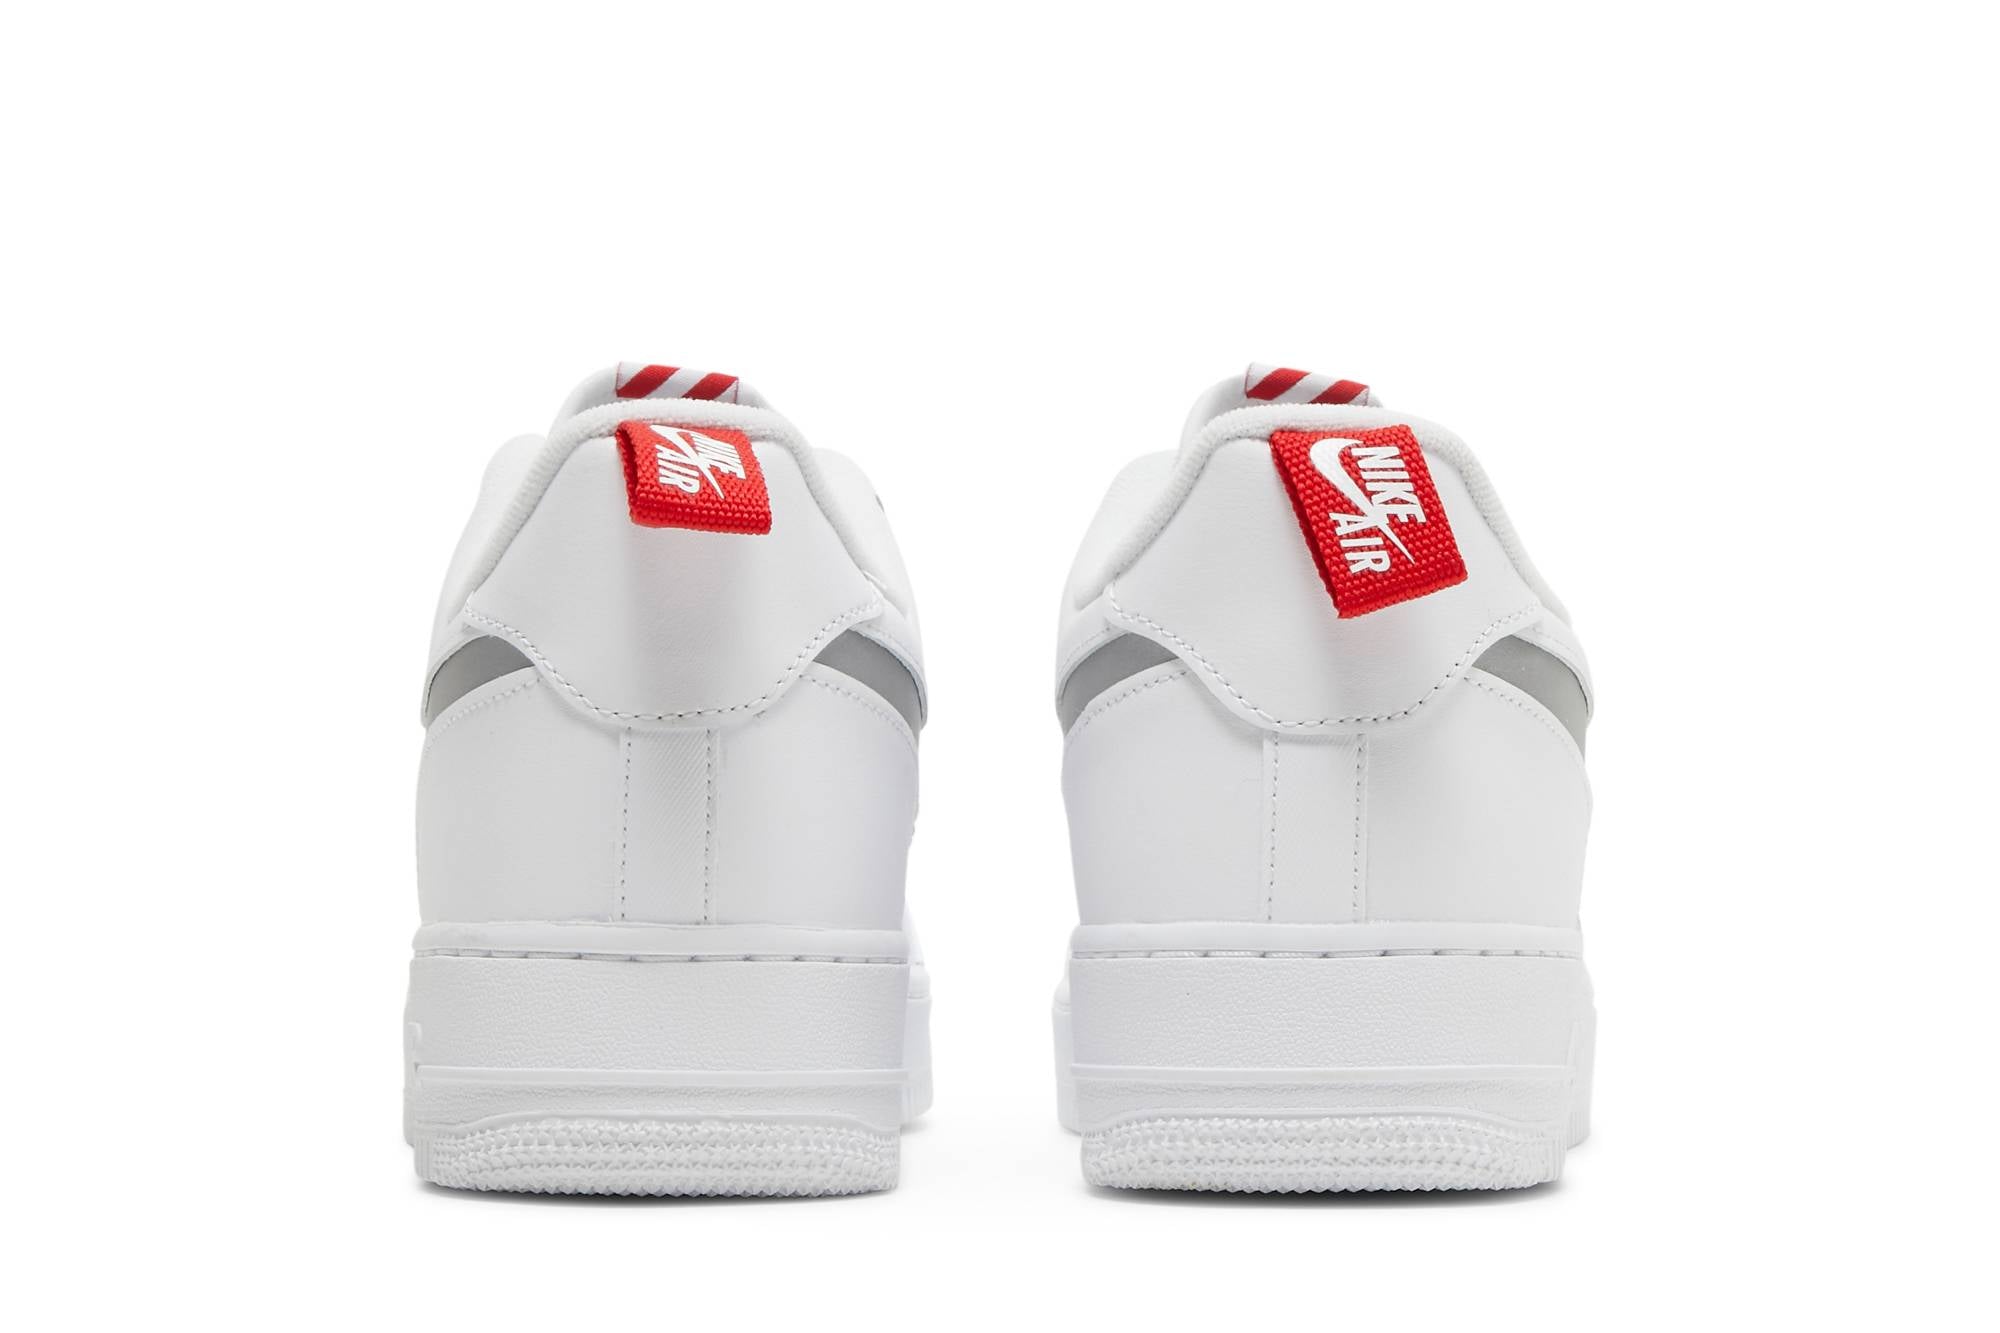 Nike Air Force 1 Low Reflective Swoosh White, Where To Buy, DO6709-100